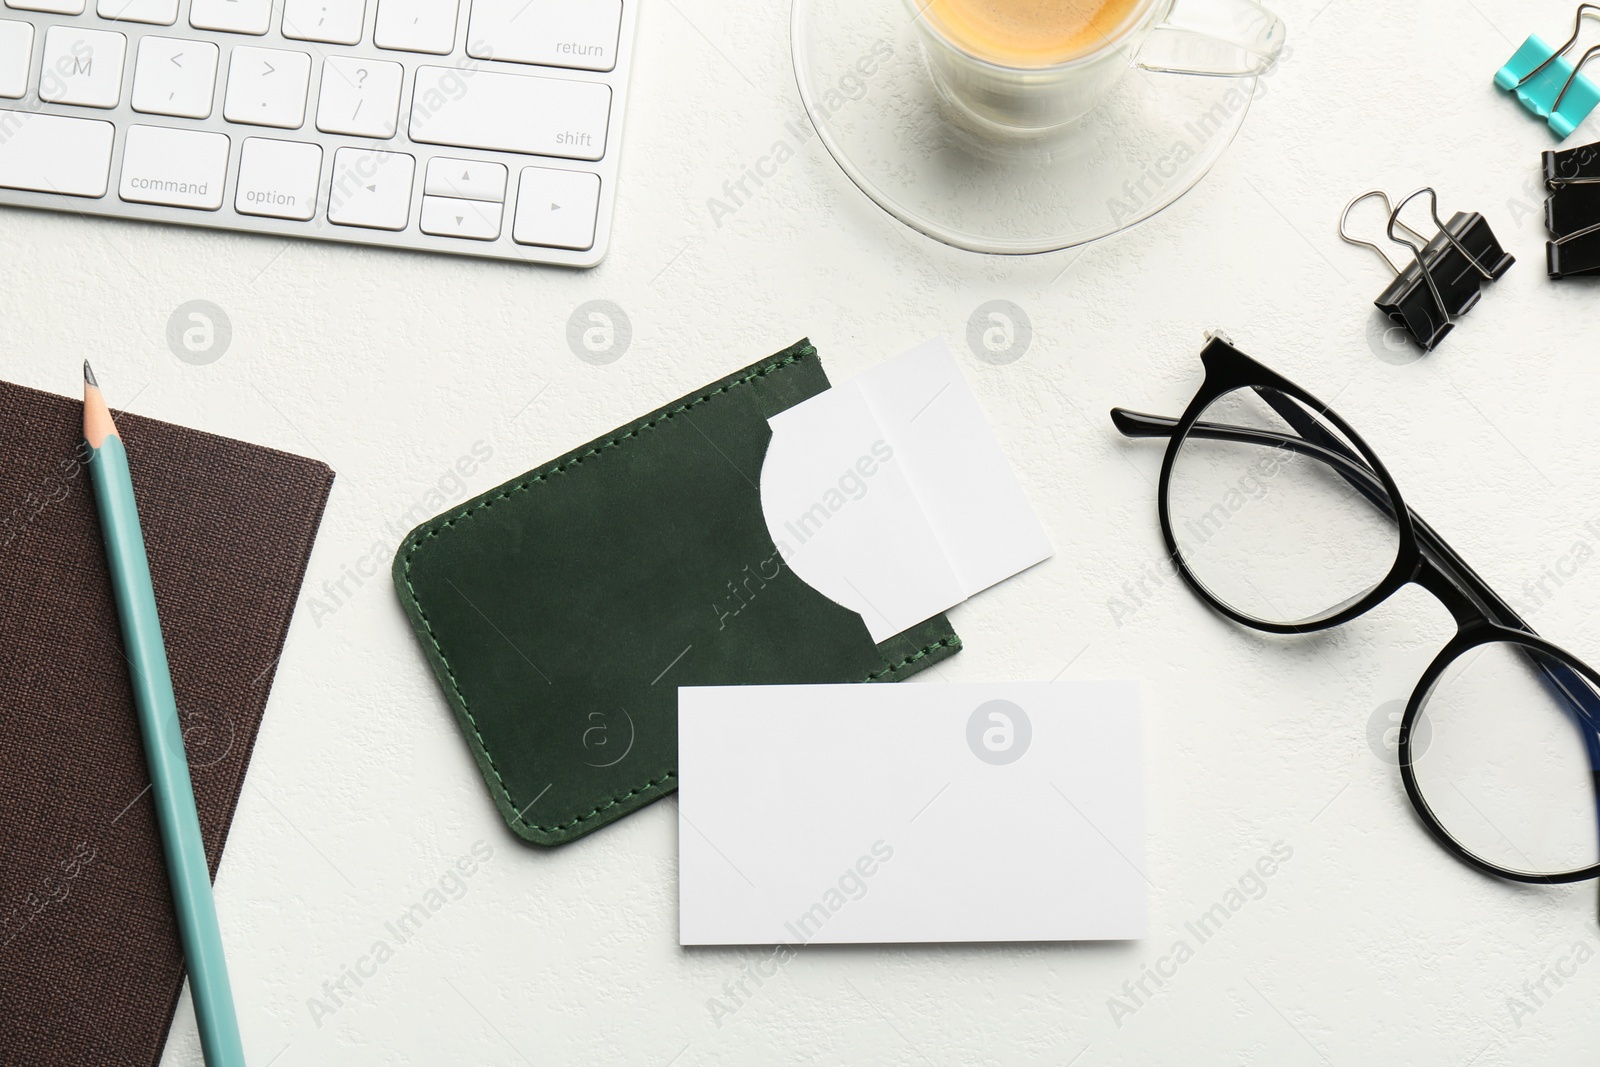 Photo of Leather business card holder with blank cards, glasses, keyboard and stationery on white table, flat lay